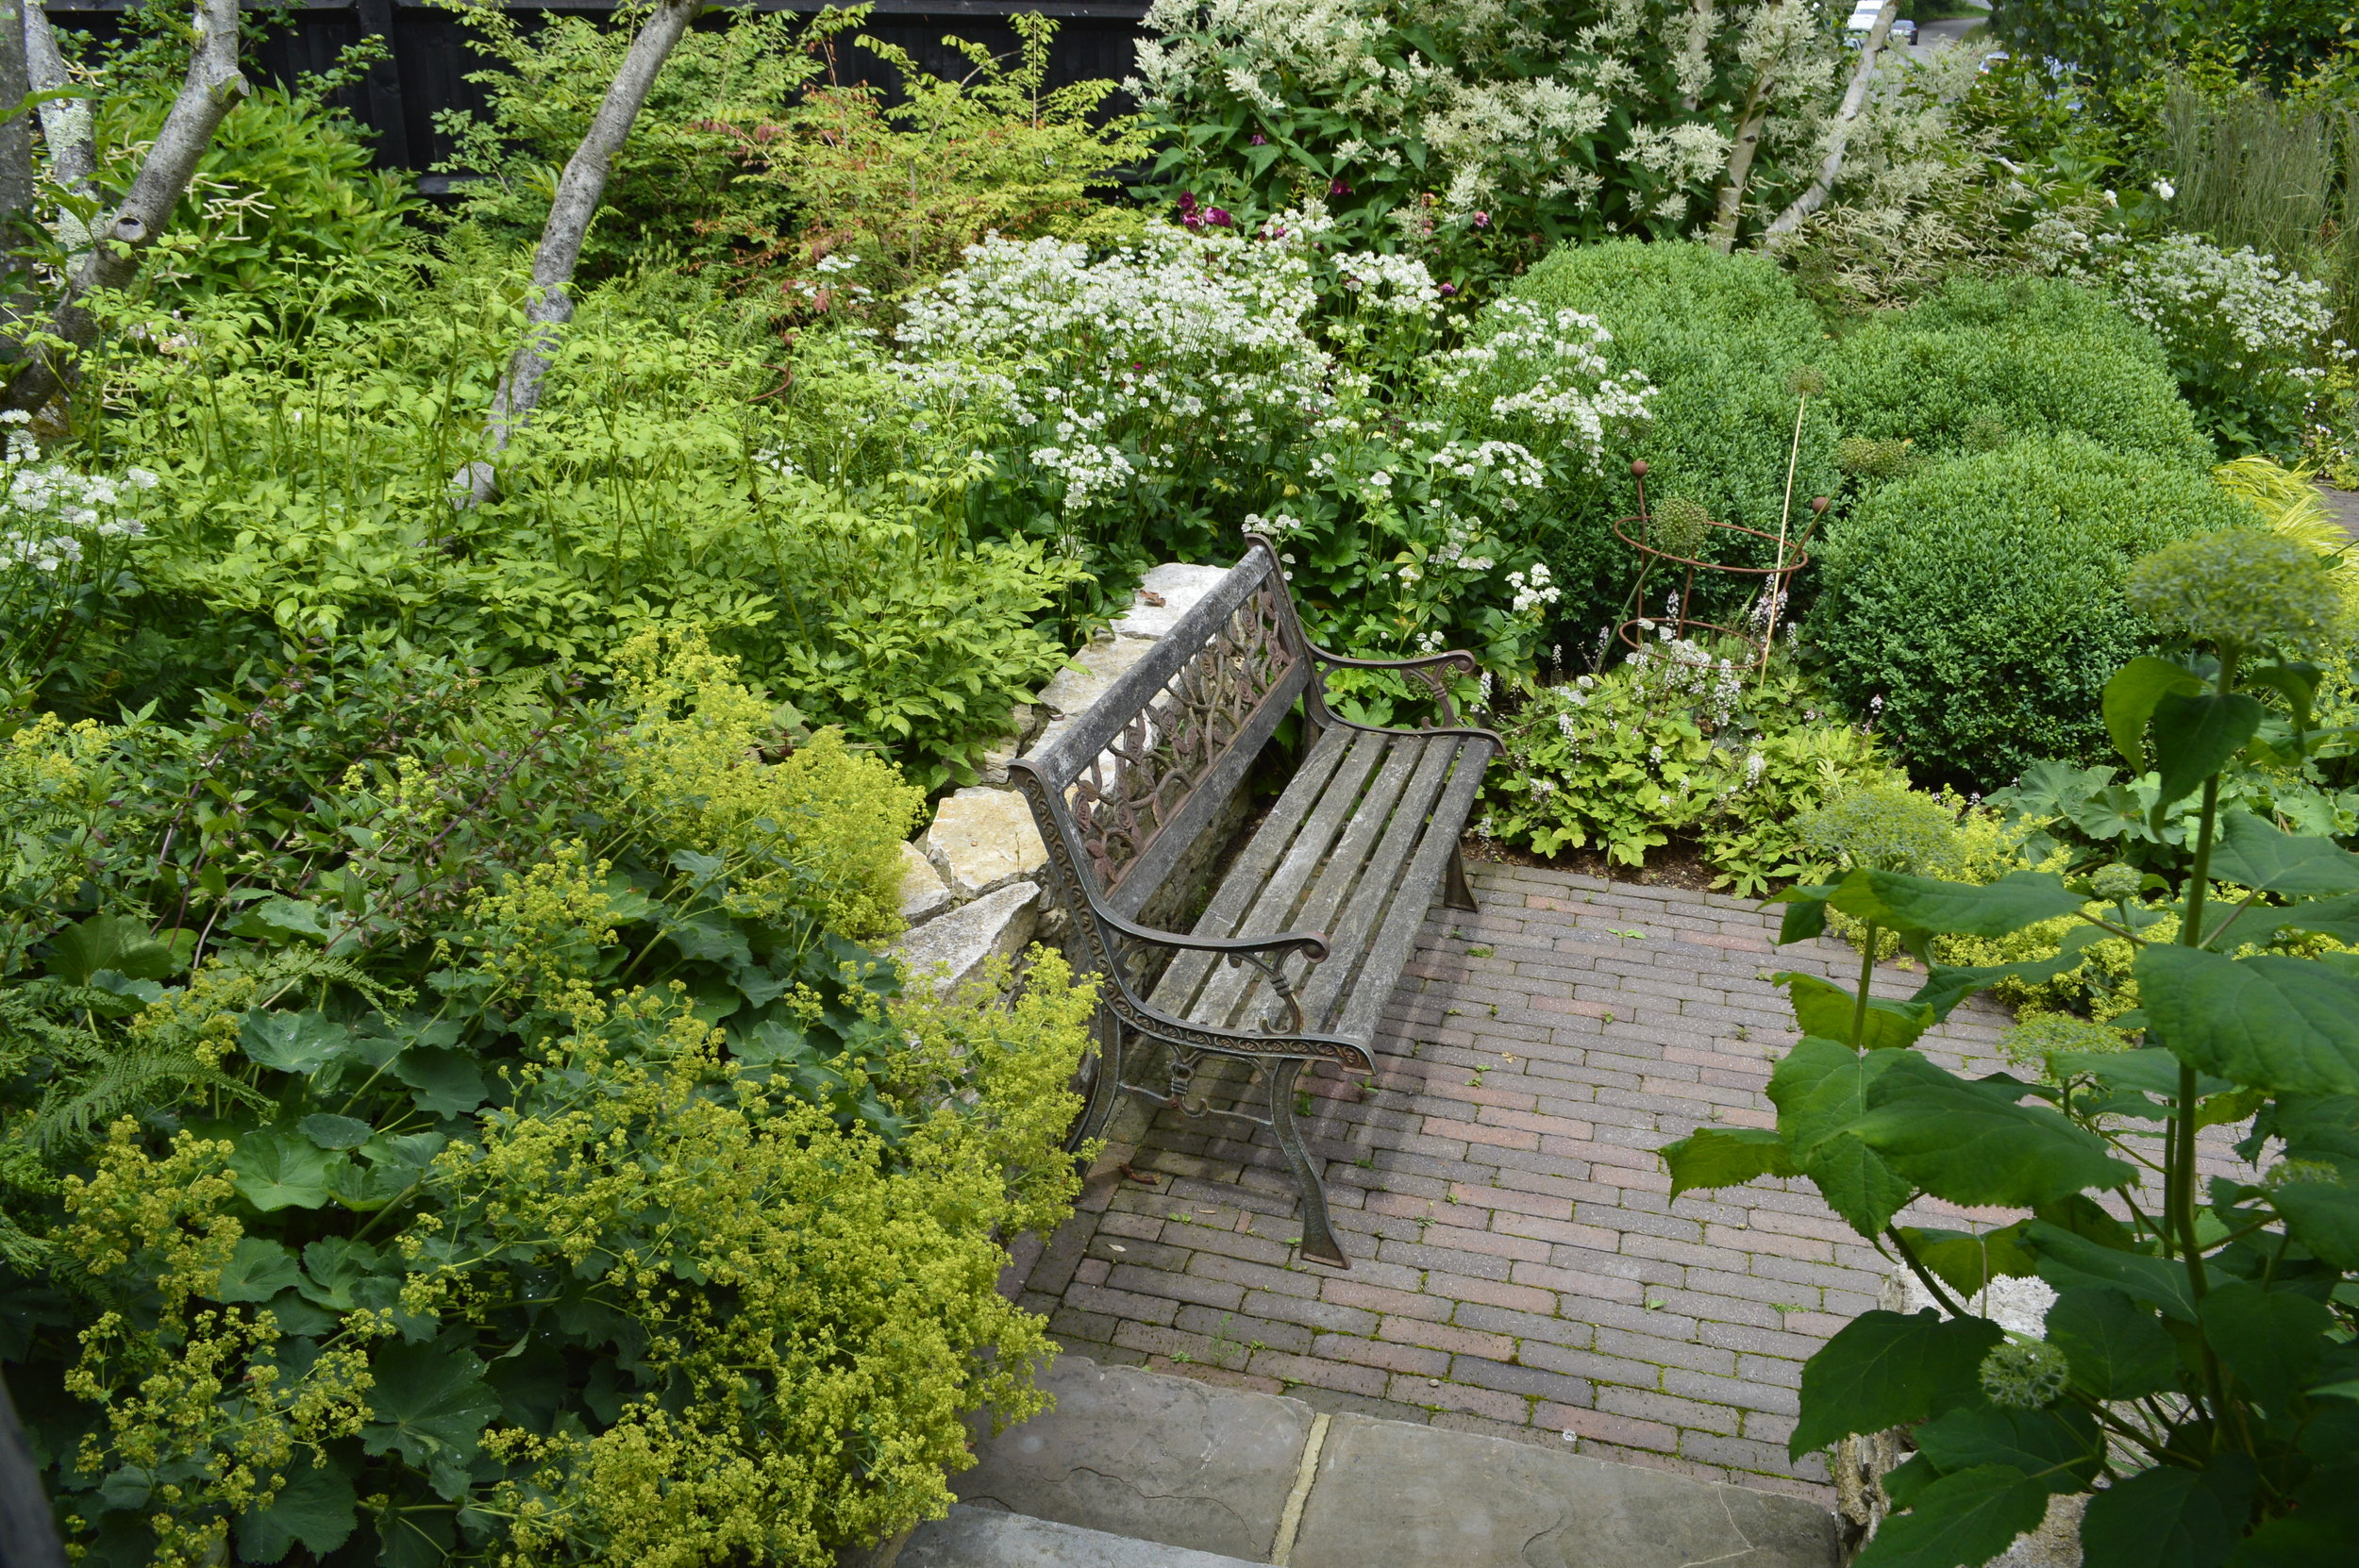 Somewhere to Sit - benches are a mainstay for any garden